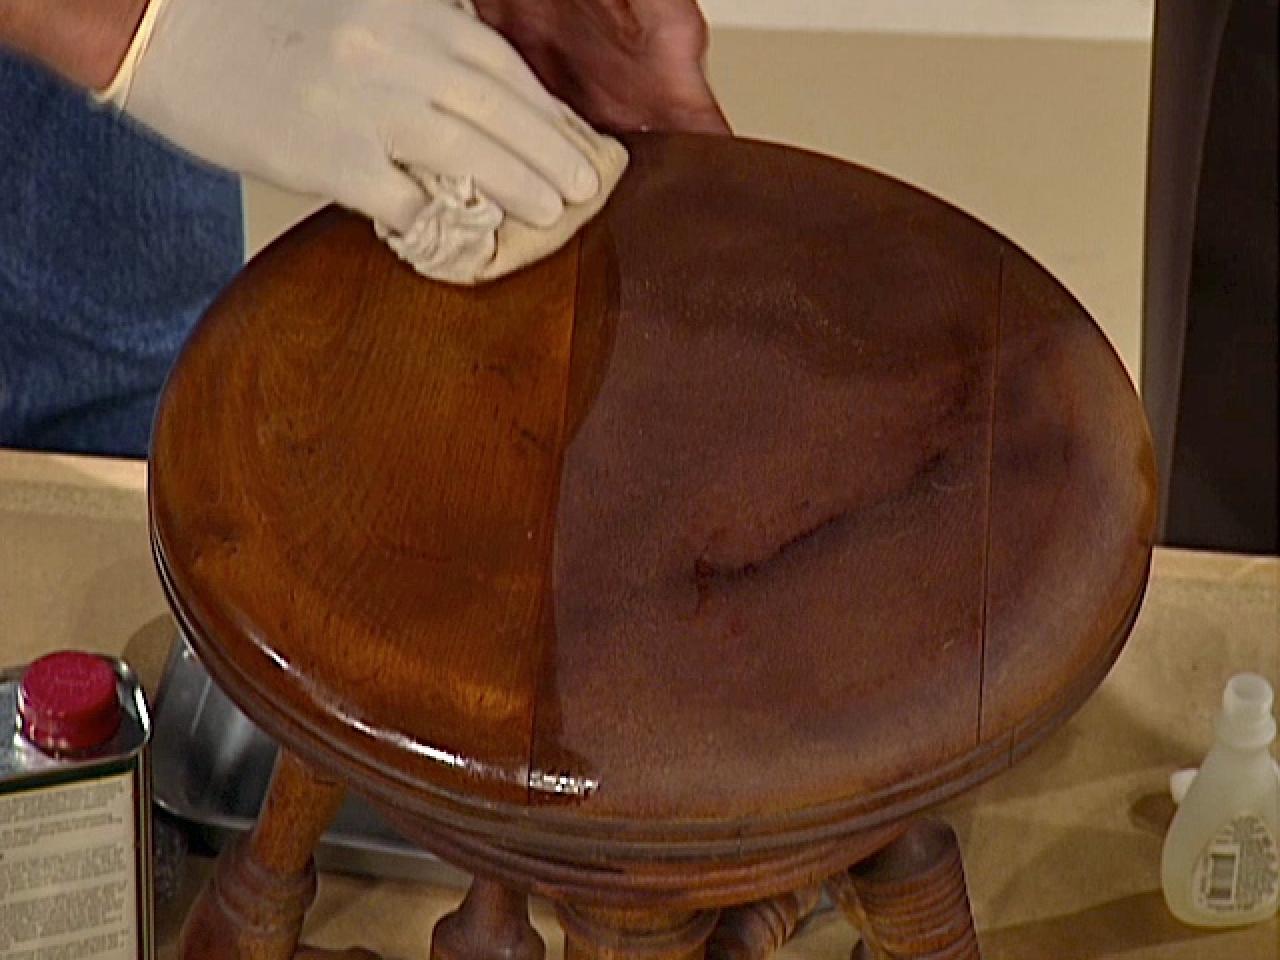 Cleaning Antiques Diy - How To Fix Old Wooden Furniture